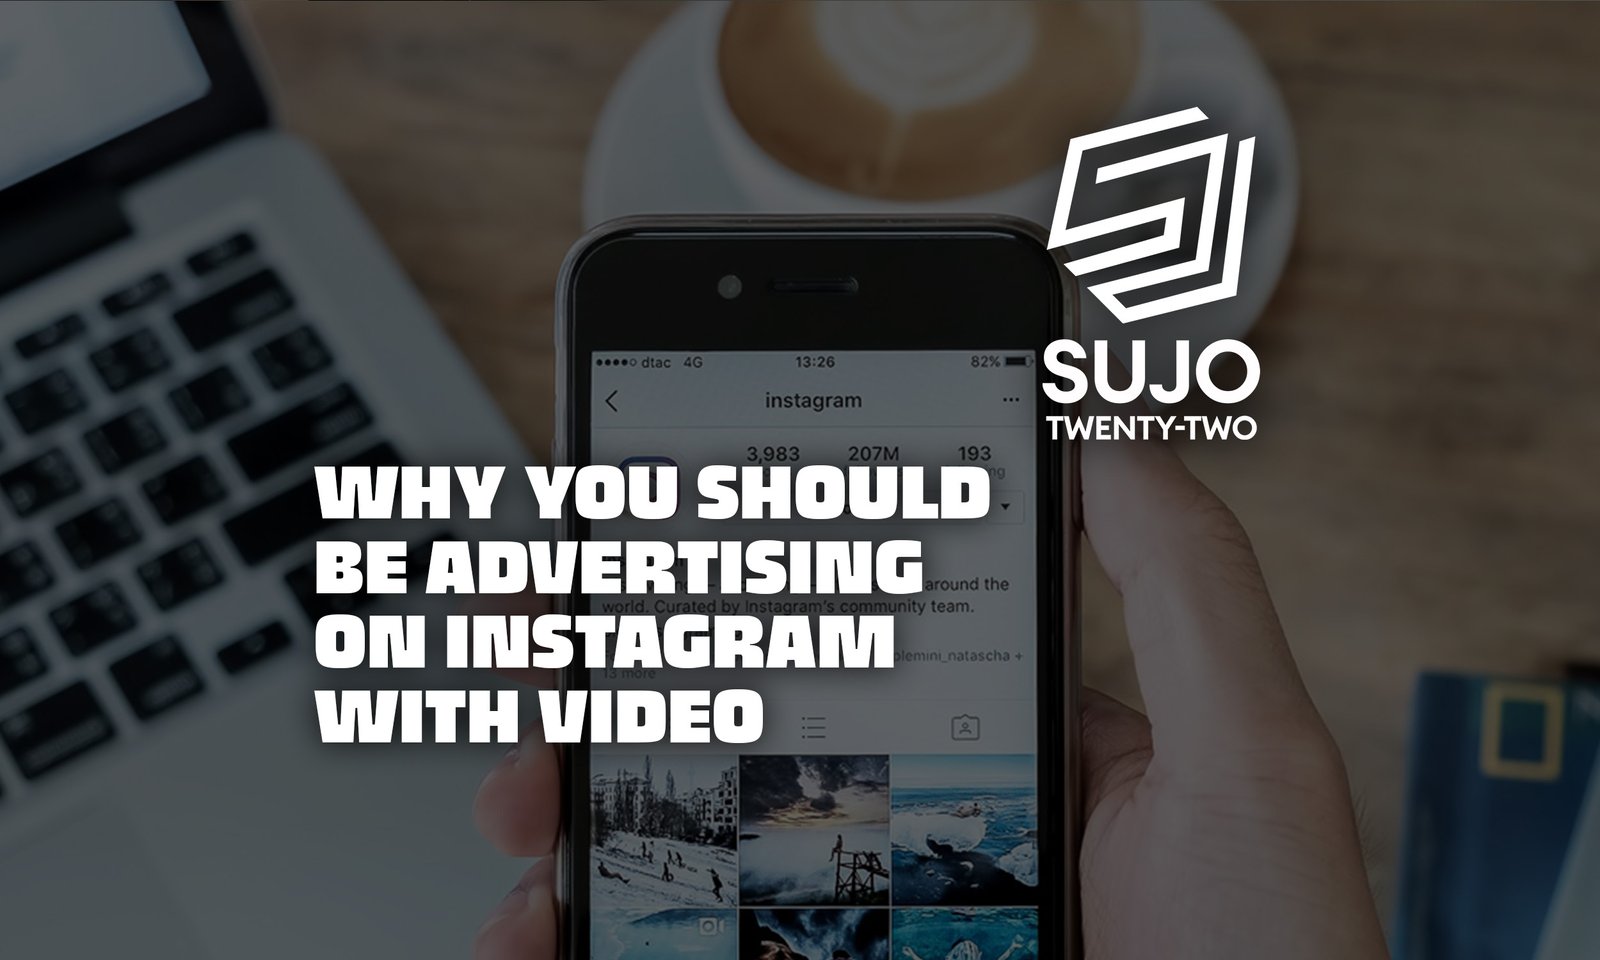 Why You Should Be Advertising On Instagram With Video | SUJO TWENTY-TWO